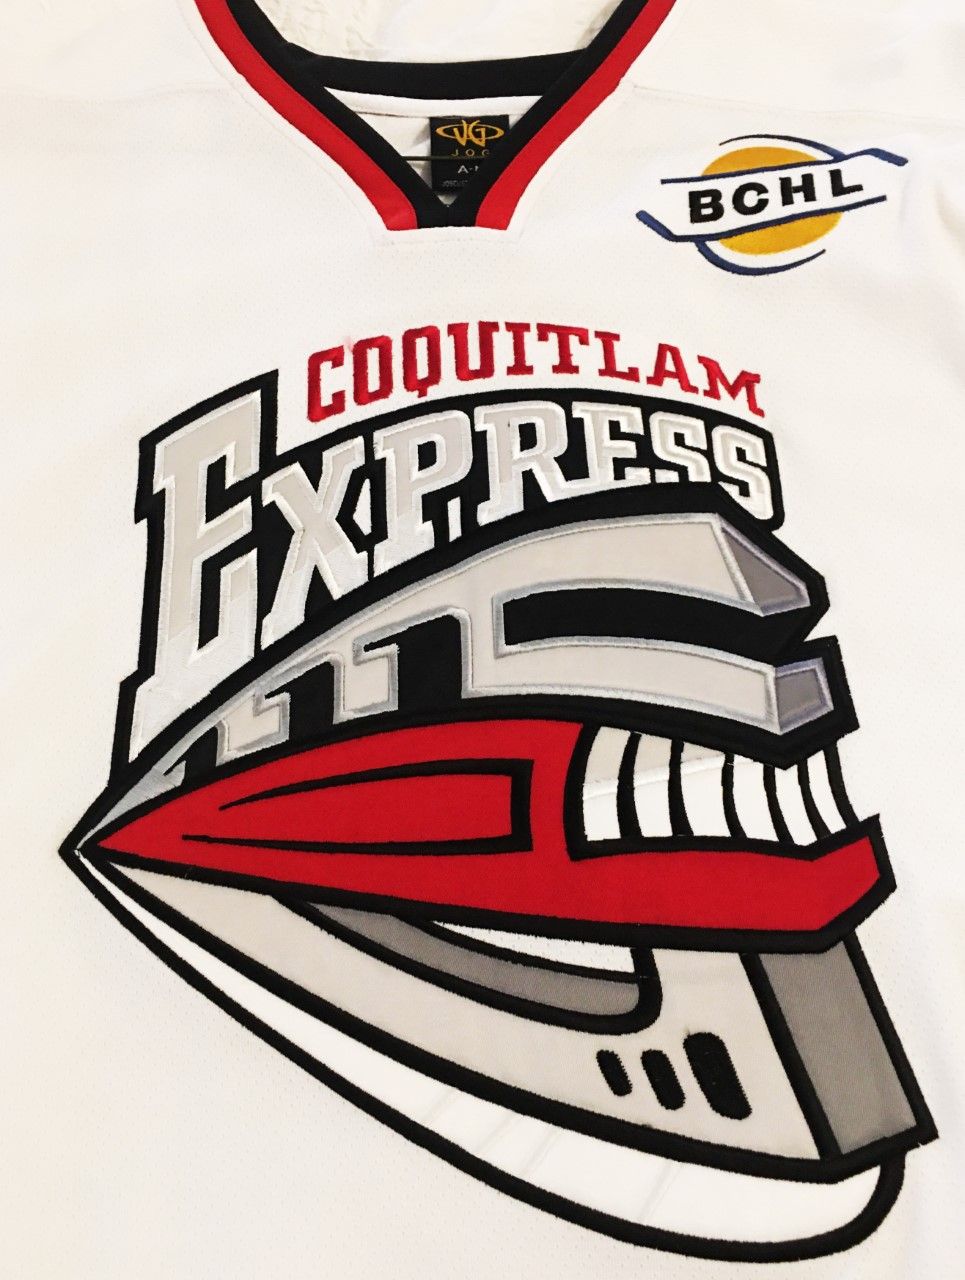 Support Local Sports! Coquitlam Express Junior A Hockey